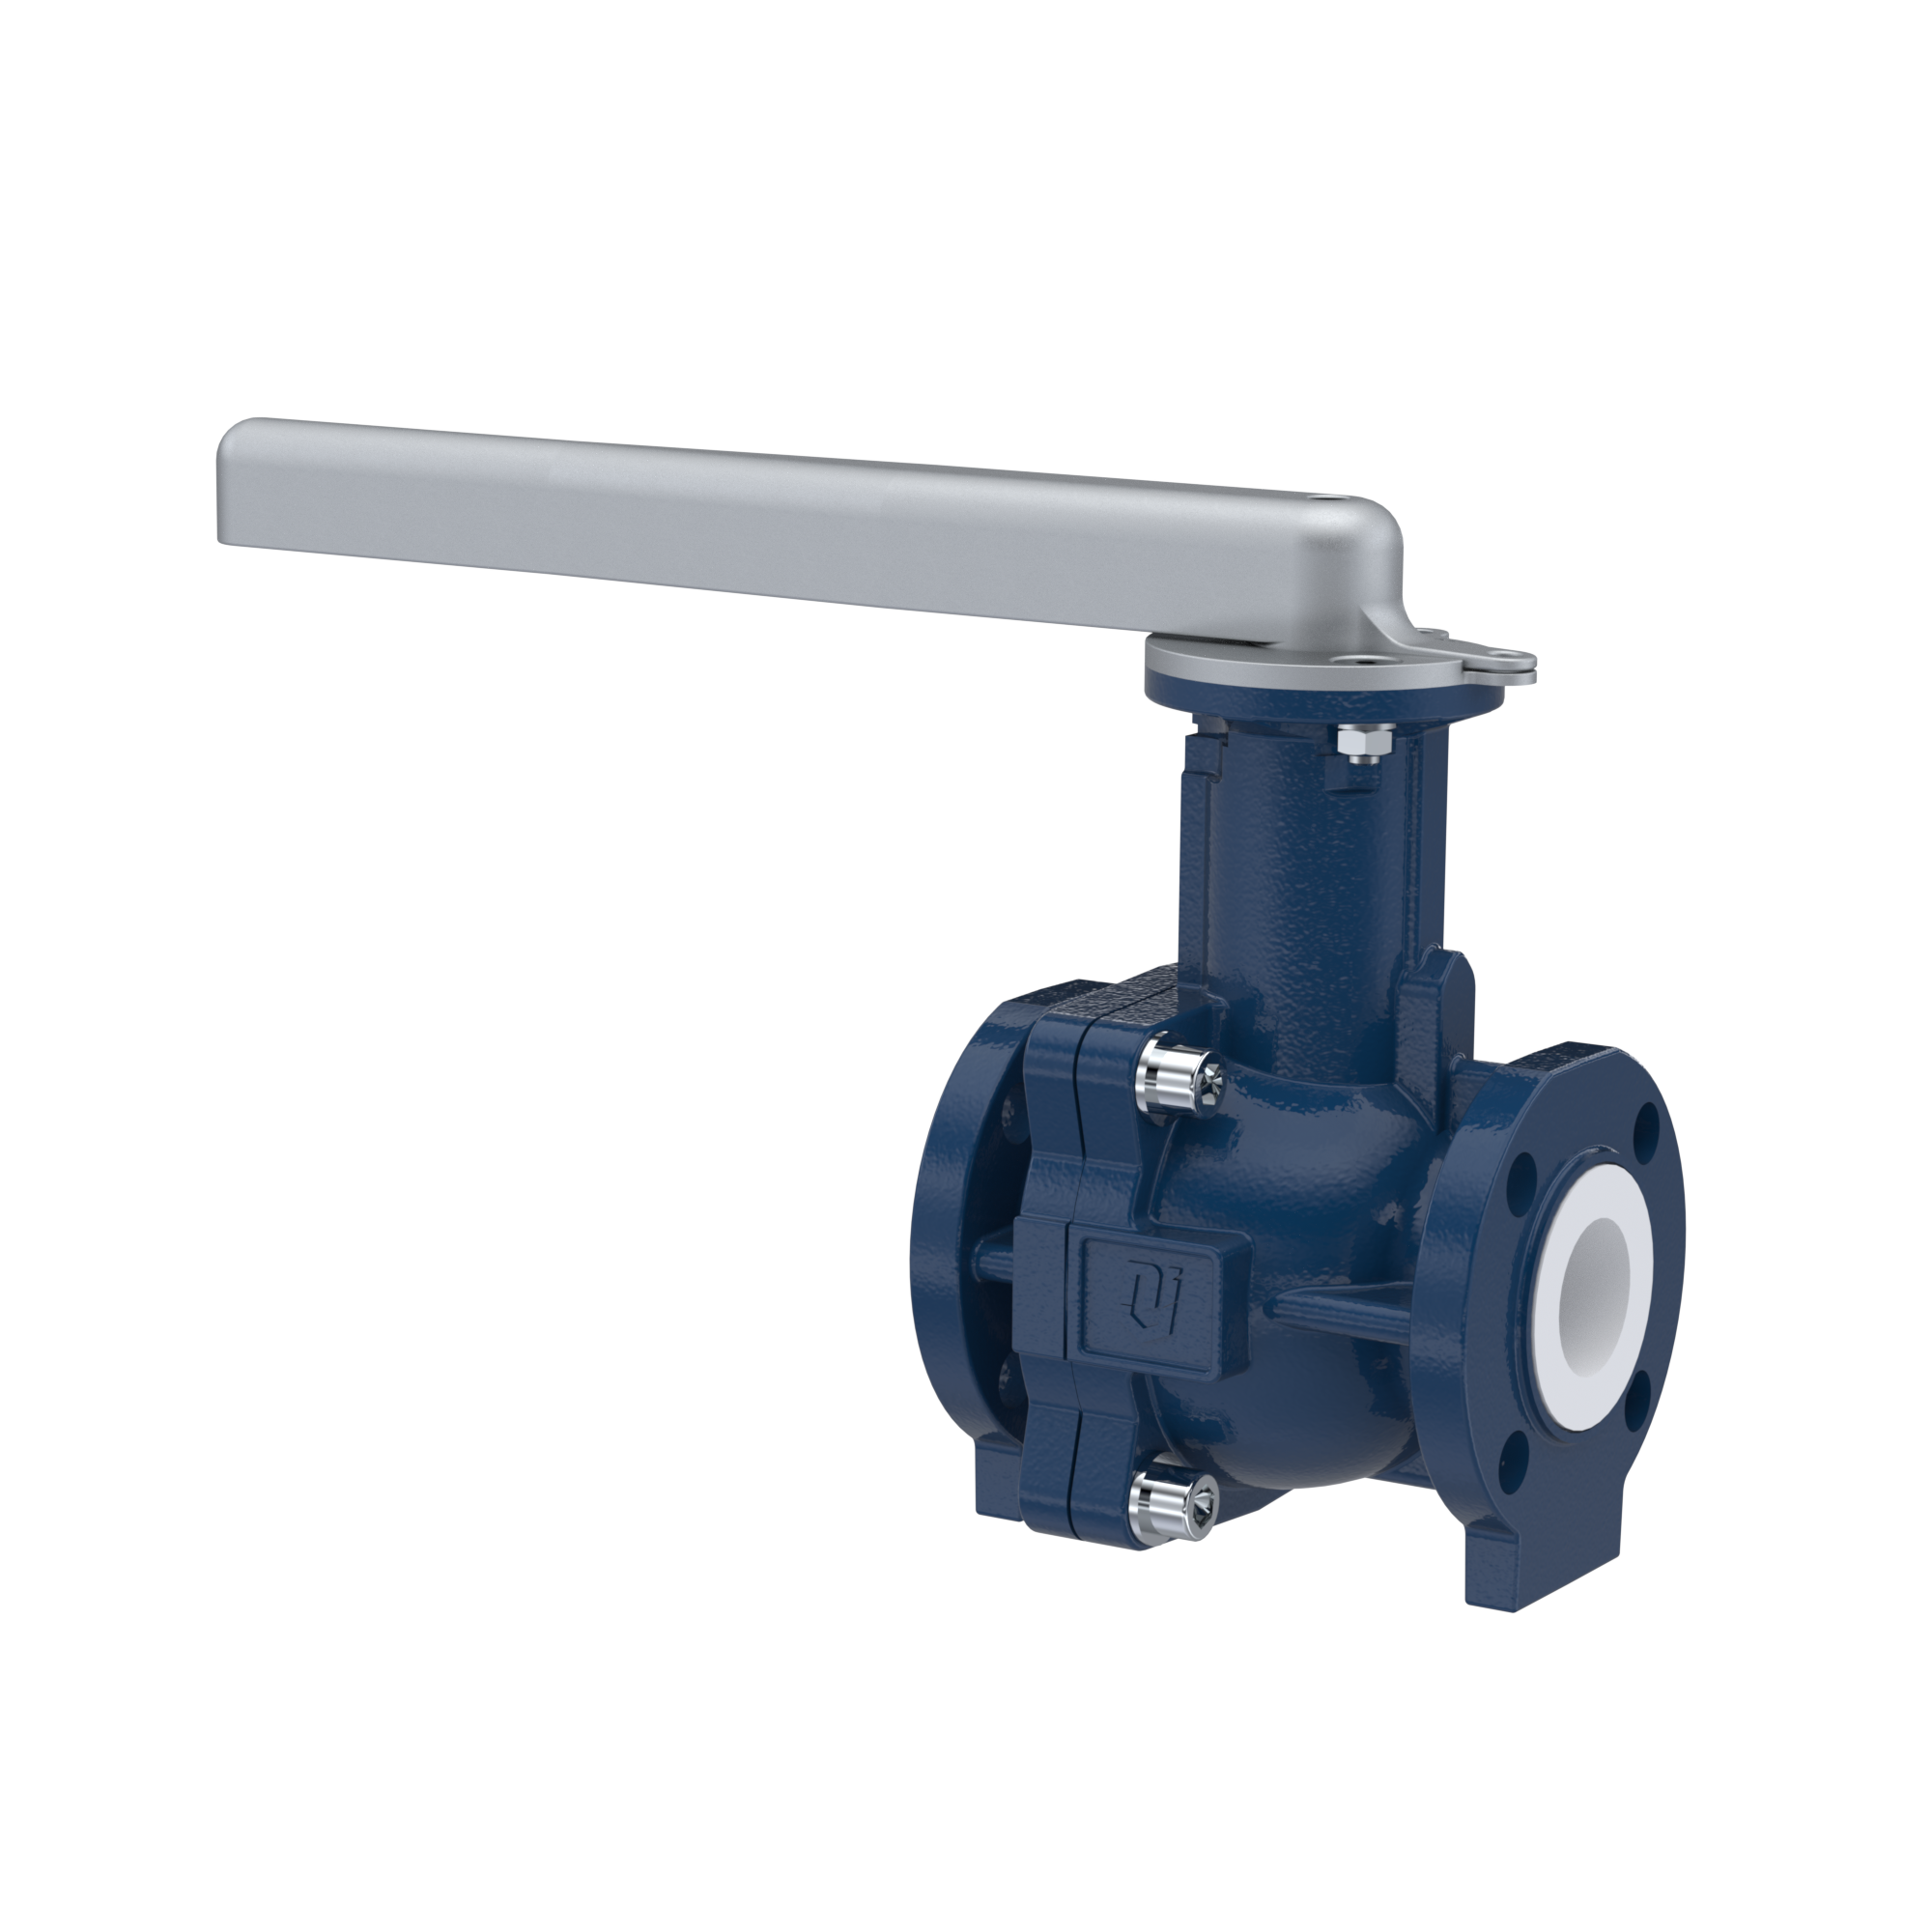 PFA-flange ball valve FK13 DN50 - 2" inch ANSI 150 made of spheroidal graphite cast iron with lever hand